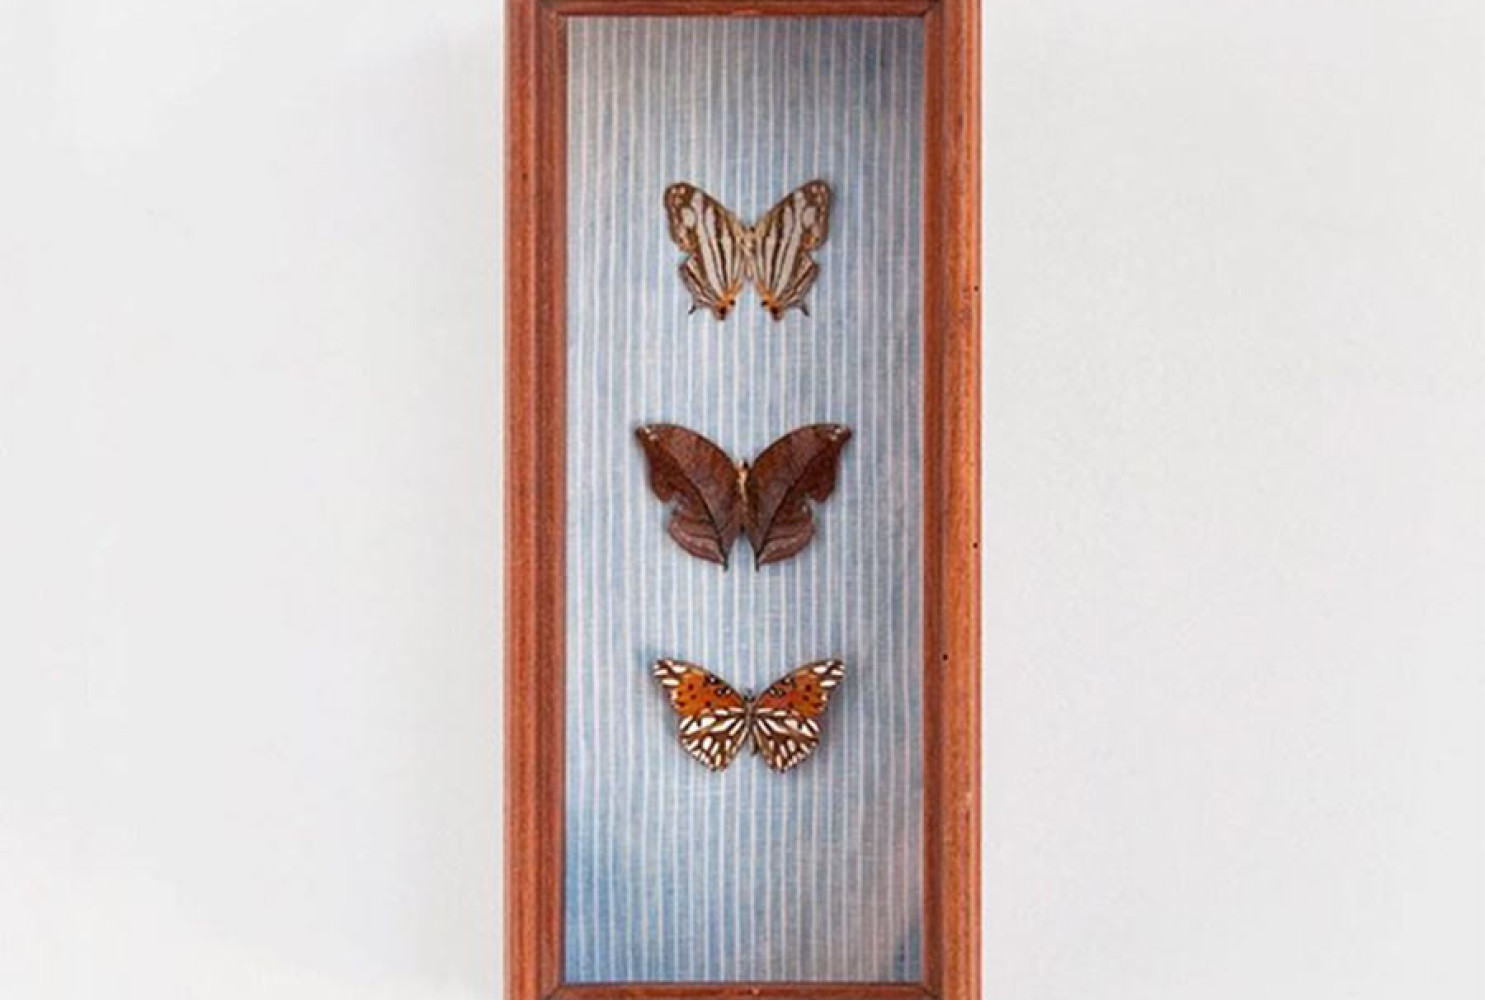 Butterfly Box made for Indigo and CottonPhoto by Brett Carron